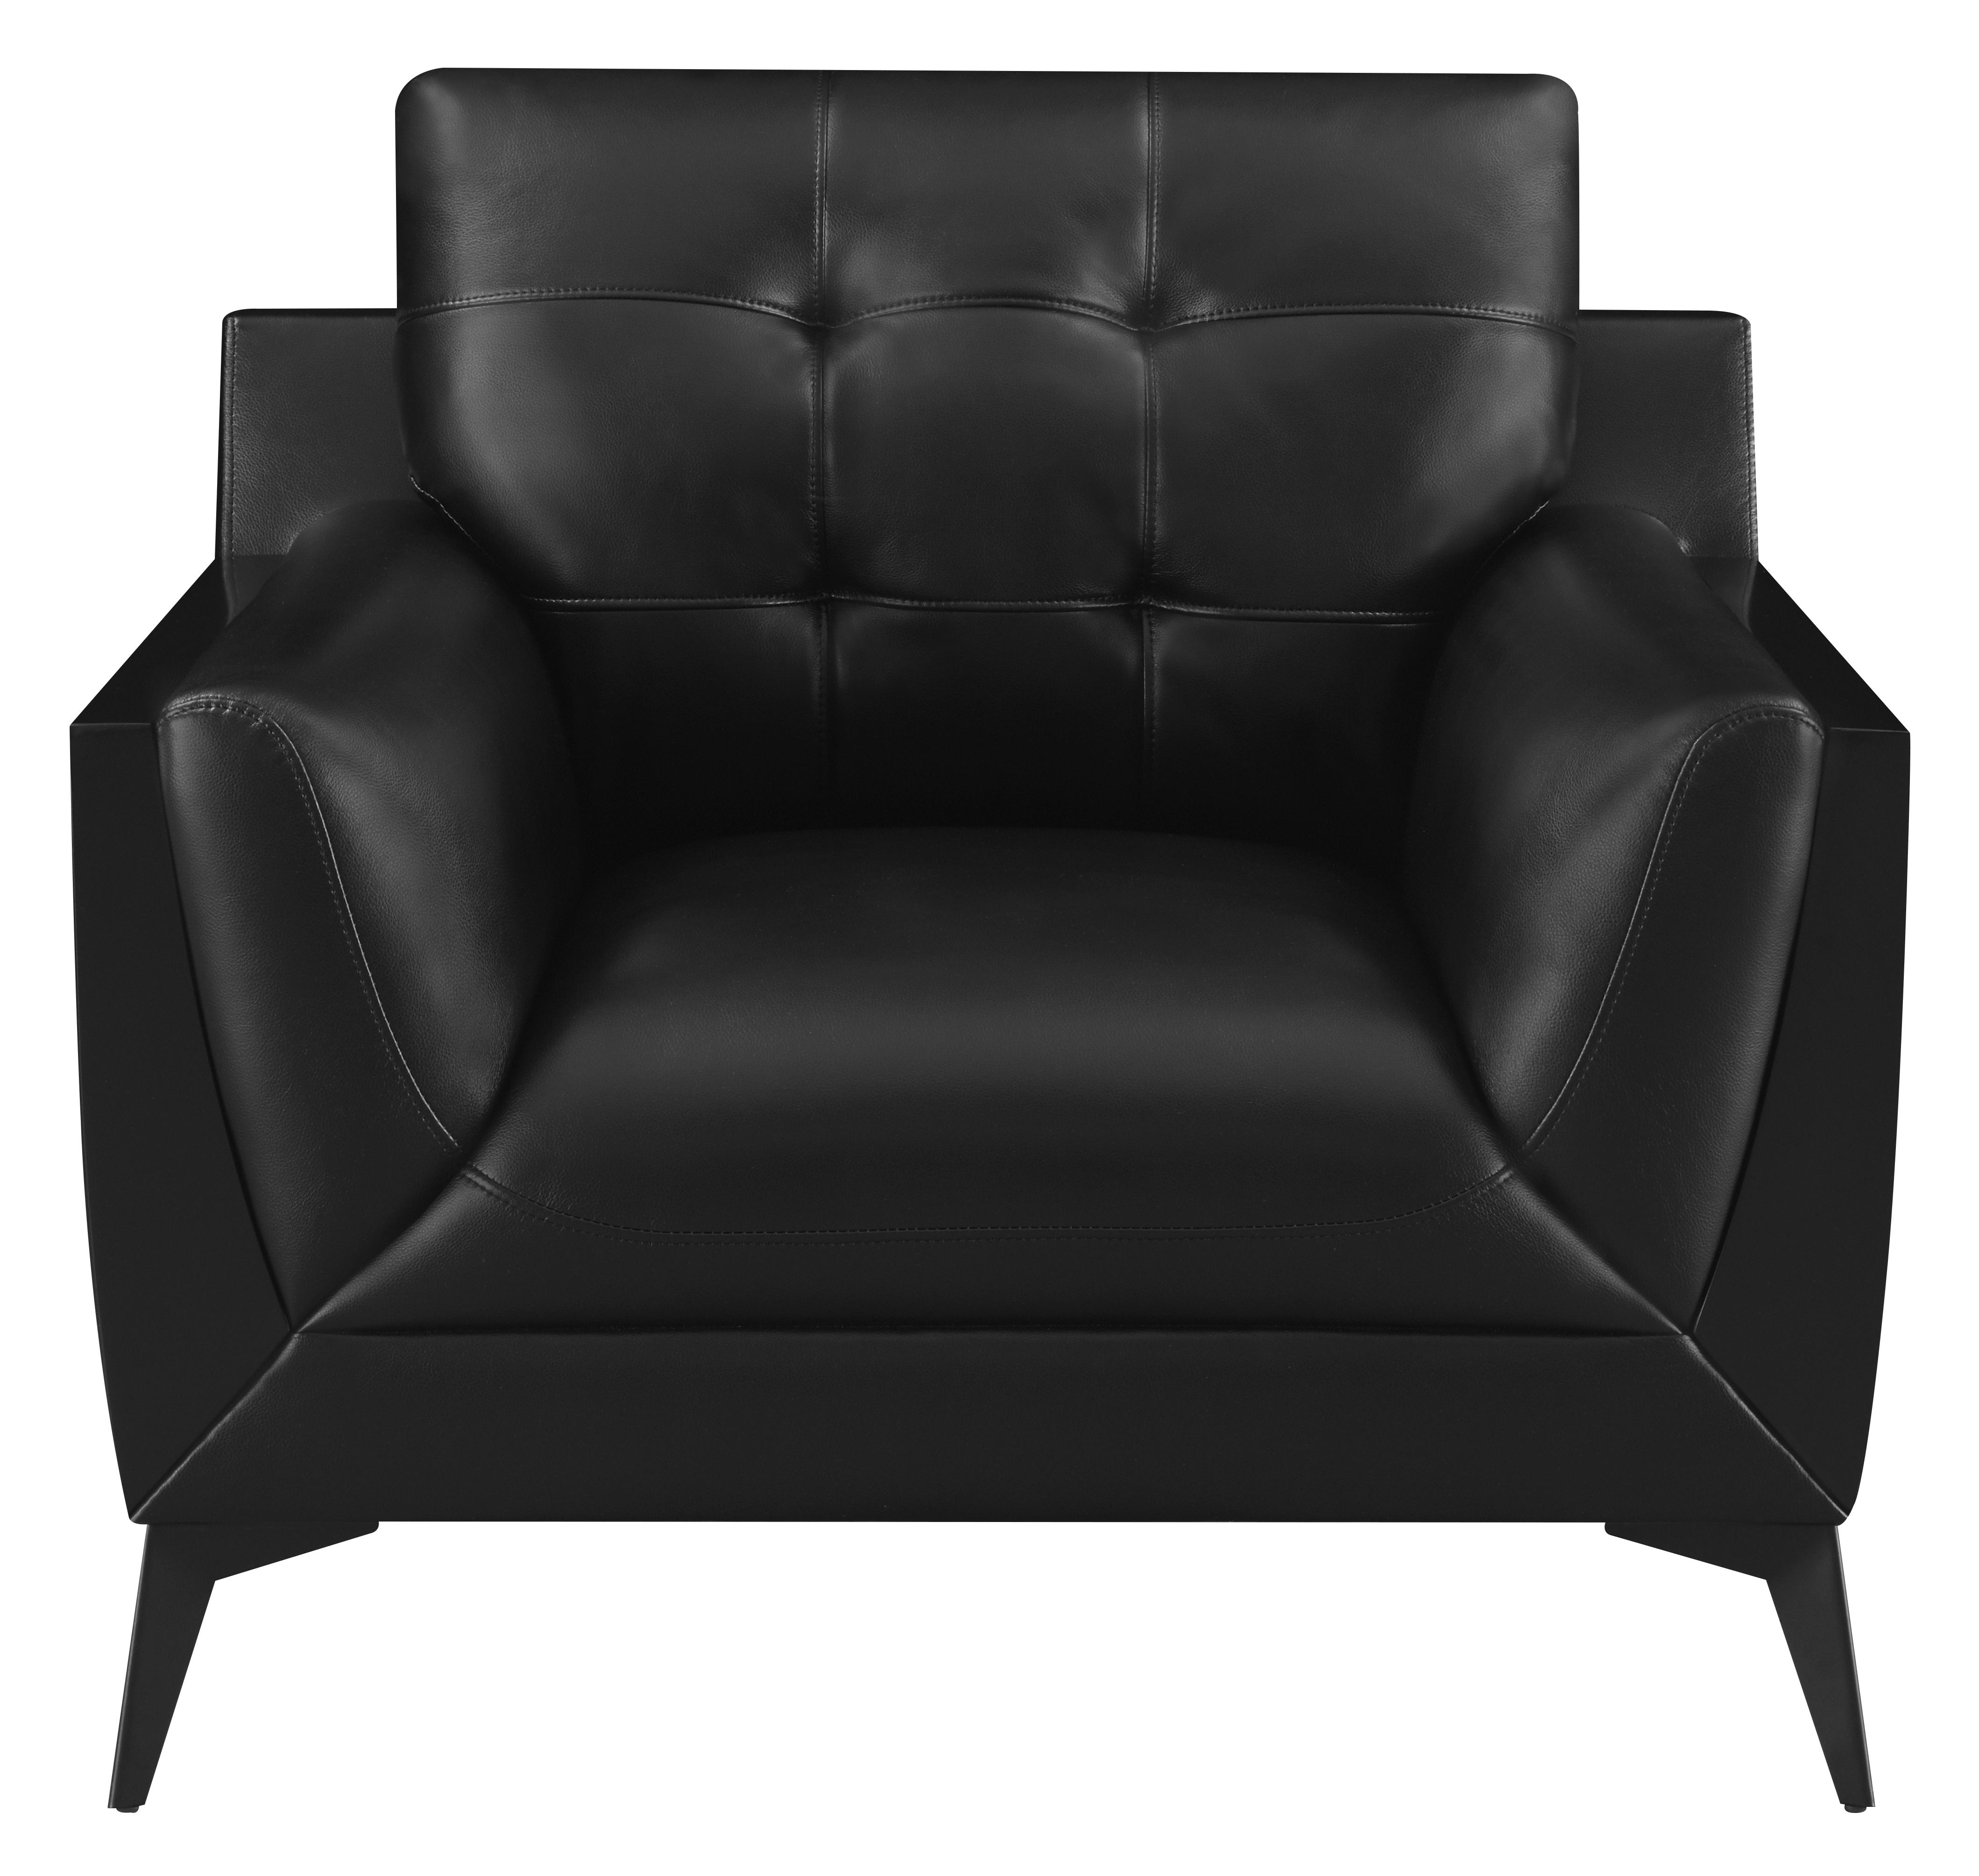 Contemporary Arm Chair 511133 Moira 511133 in Black Leatherette